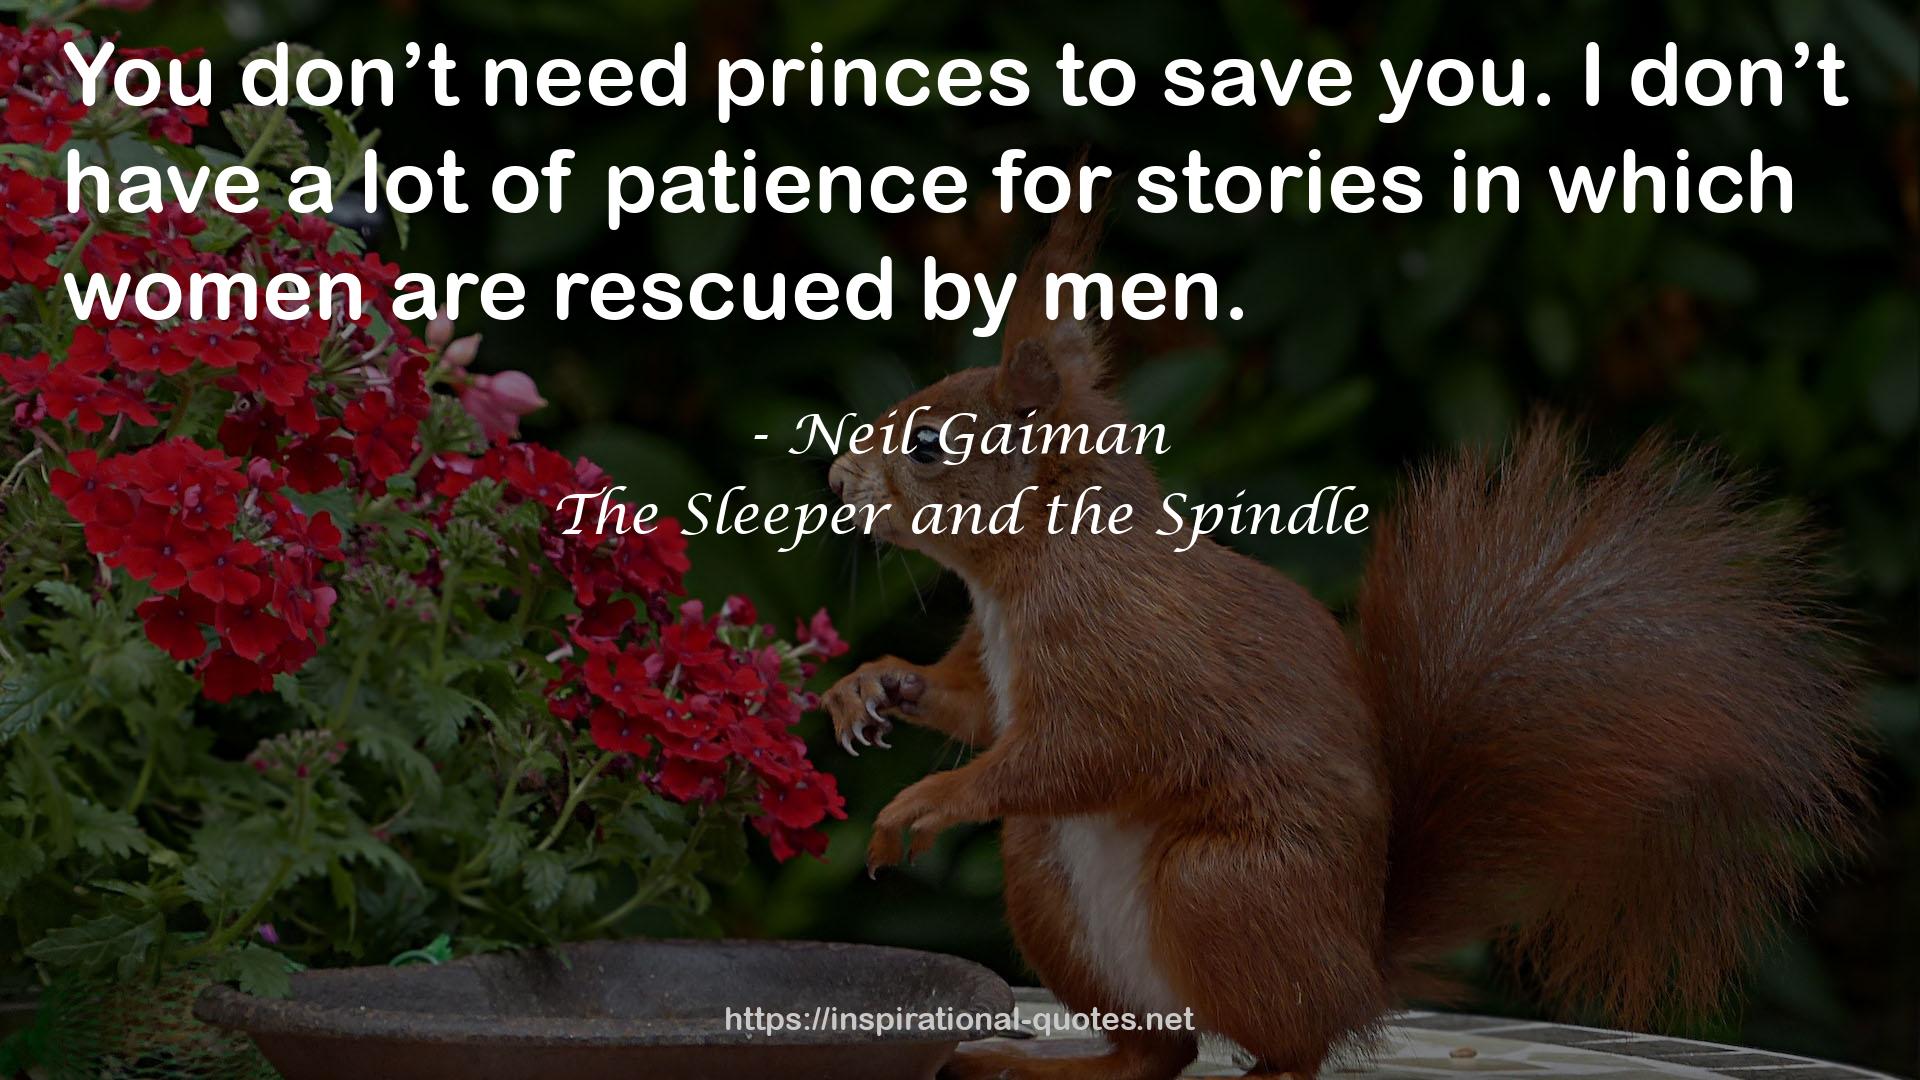 The Sleeper and the Spindle QUOTES